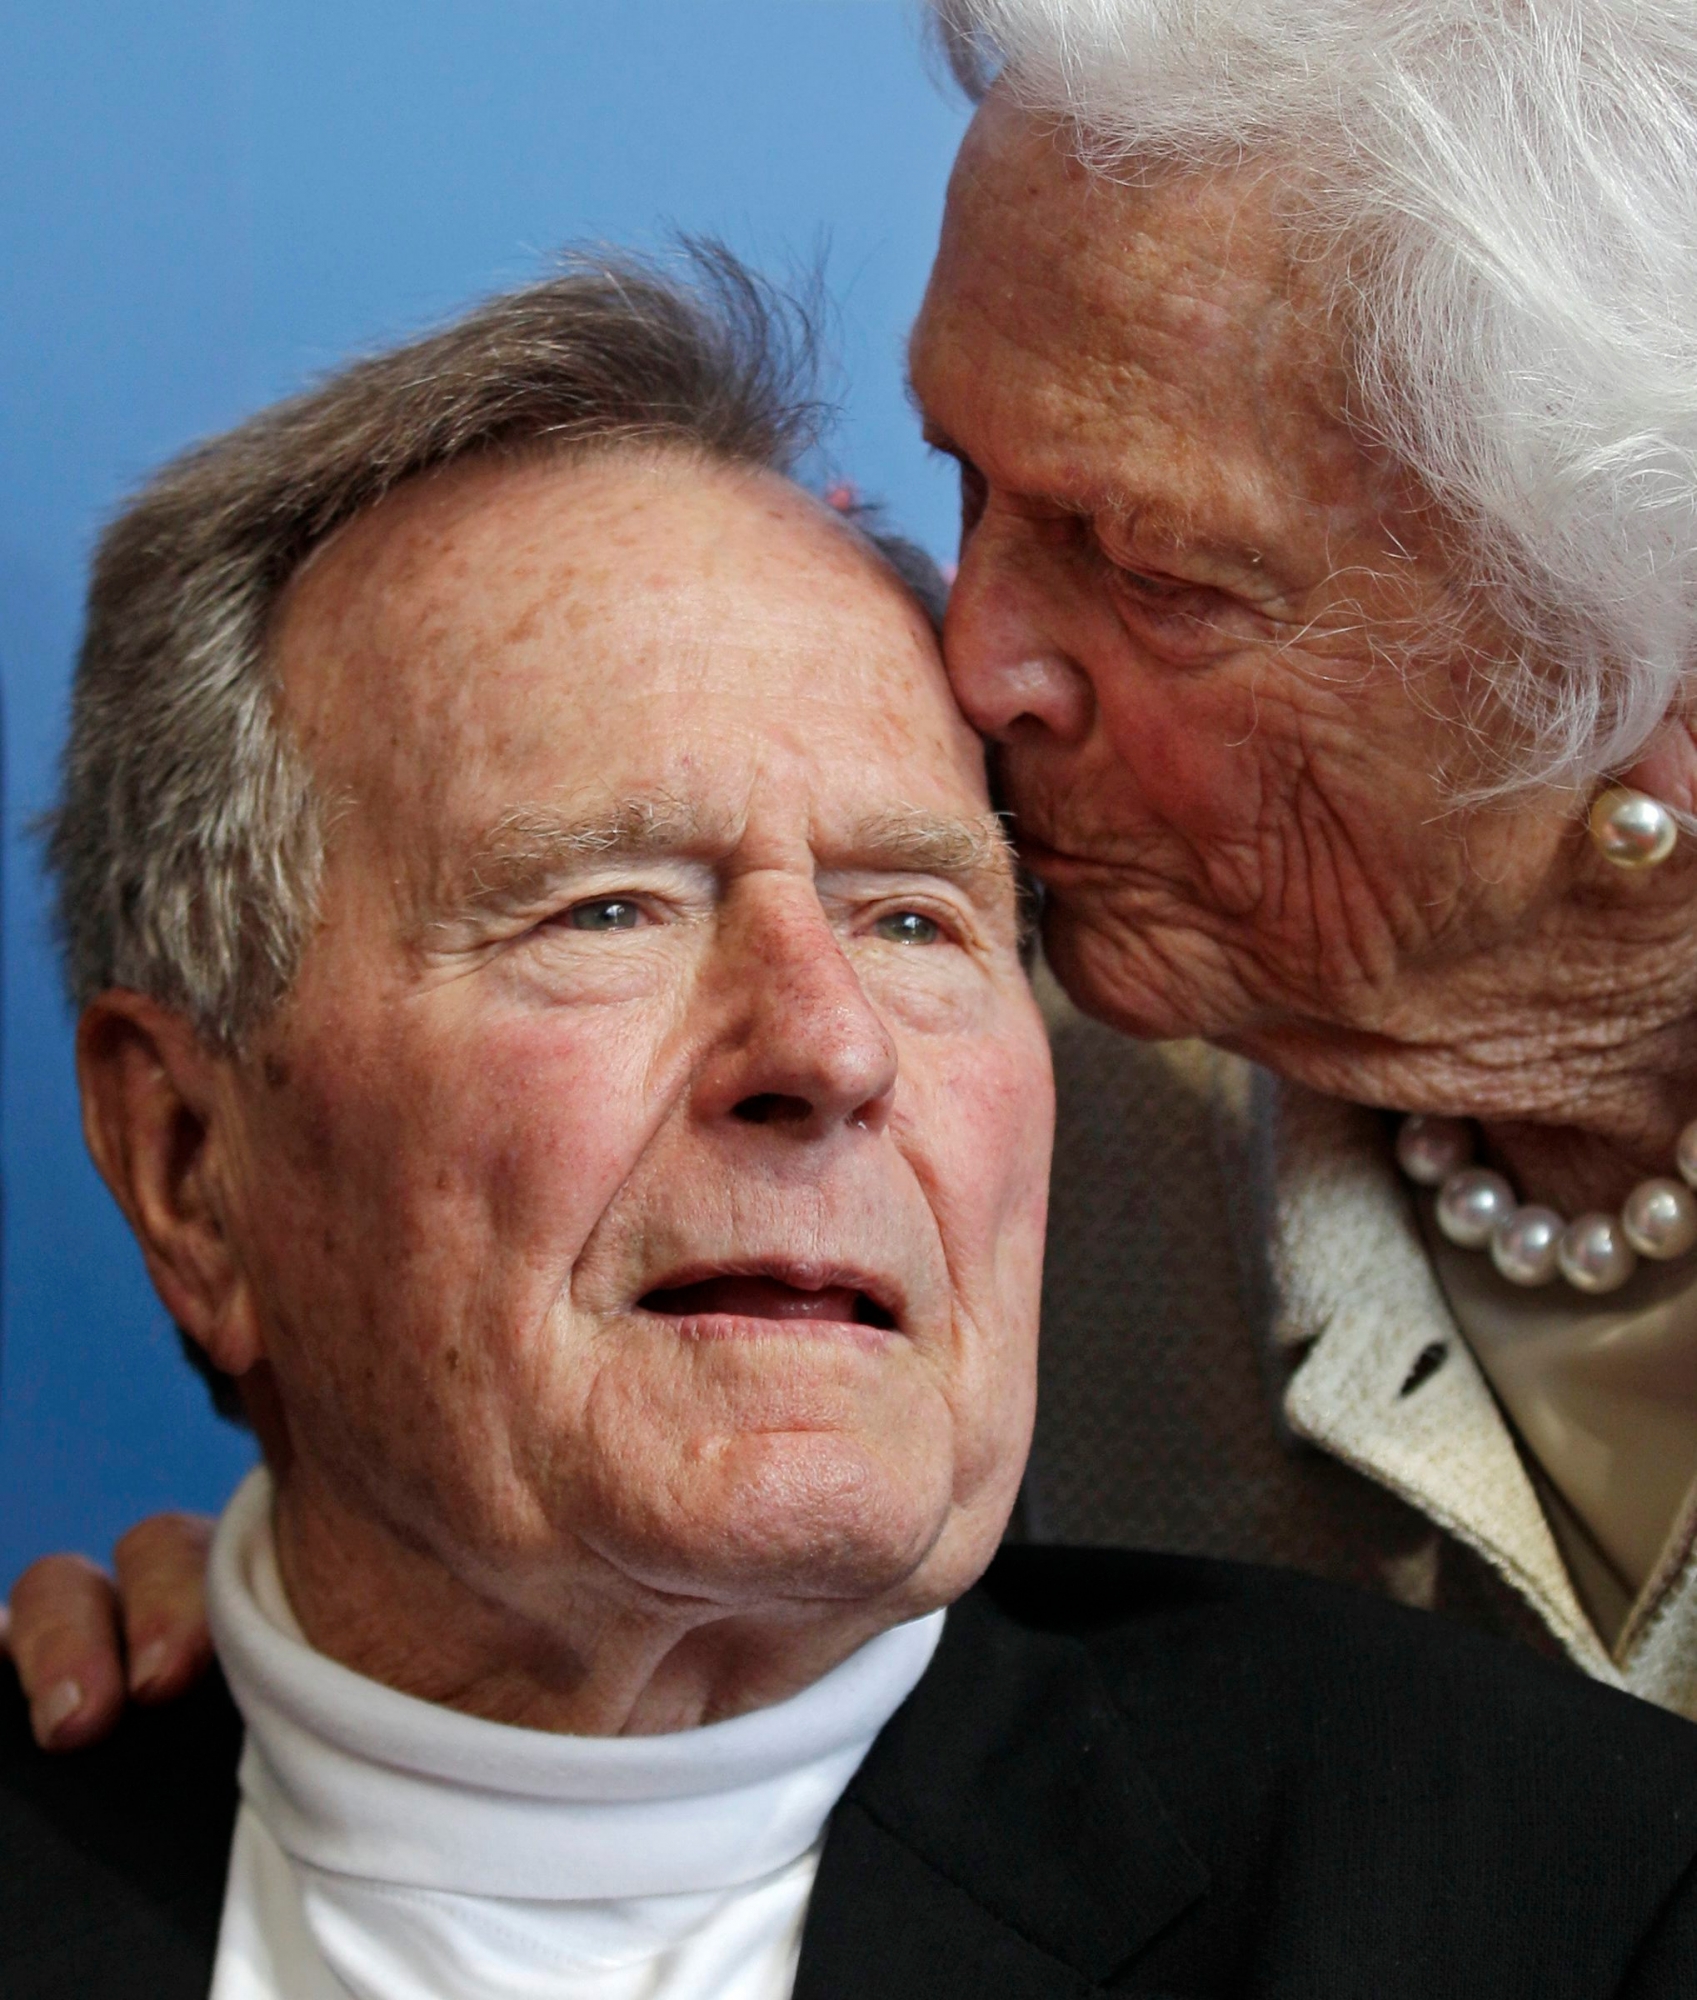 ARCHIV -- ZUM HEUTE VERSTORBENEN EHEMALIGEN US PRAESIDENT GEORGE BUSH,  STELLEN WIR IHNEN FOLGENDES BILDMATERIAL ZUR VERFUEGUNG -- FILE - In a Tuesday, June 12, 2012 file photo, former President George H.W. Bush, and his wife former first lady Barbara Bush, arrive for the premiere of HBO's new documentary on his life near the family compound in Kennebunkport, Maine. Former President Bush has been hospitalized for about a week in Houston for treatment of a lingering cough. Bush&#x2019;s chief of staff, Jean Becker, says the 88-year-old former president is being treated for bronchitis at Houston&#x2019;s Methodist Hospital and is expected to be released by the weekend. He was admitted Friday, Nov. 23, 2012.  (AP Photo/Charles Krupa, File) USA POLITIK GEORGE BUSH